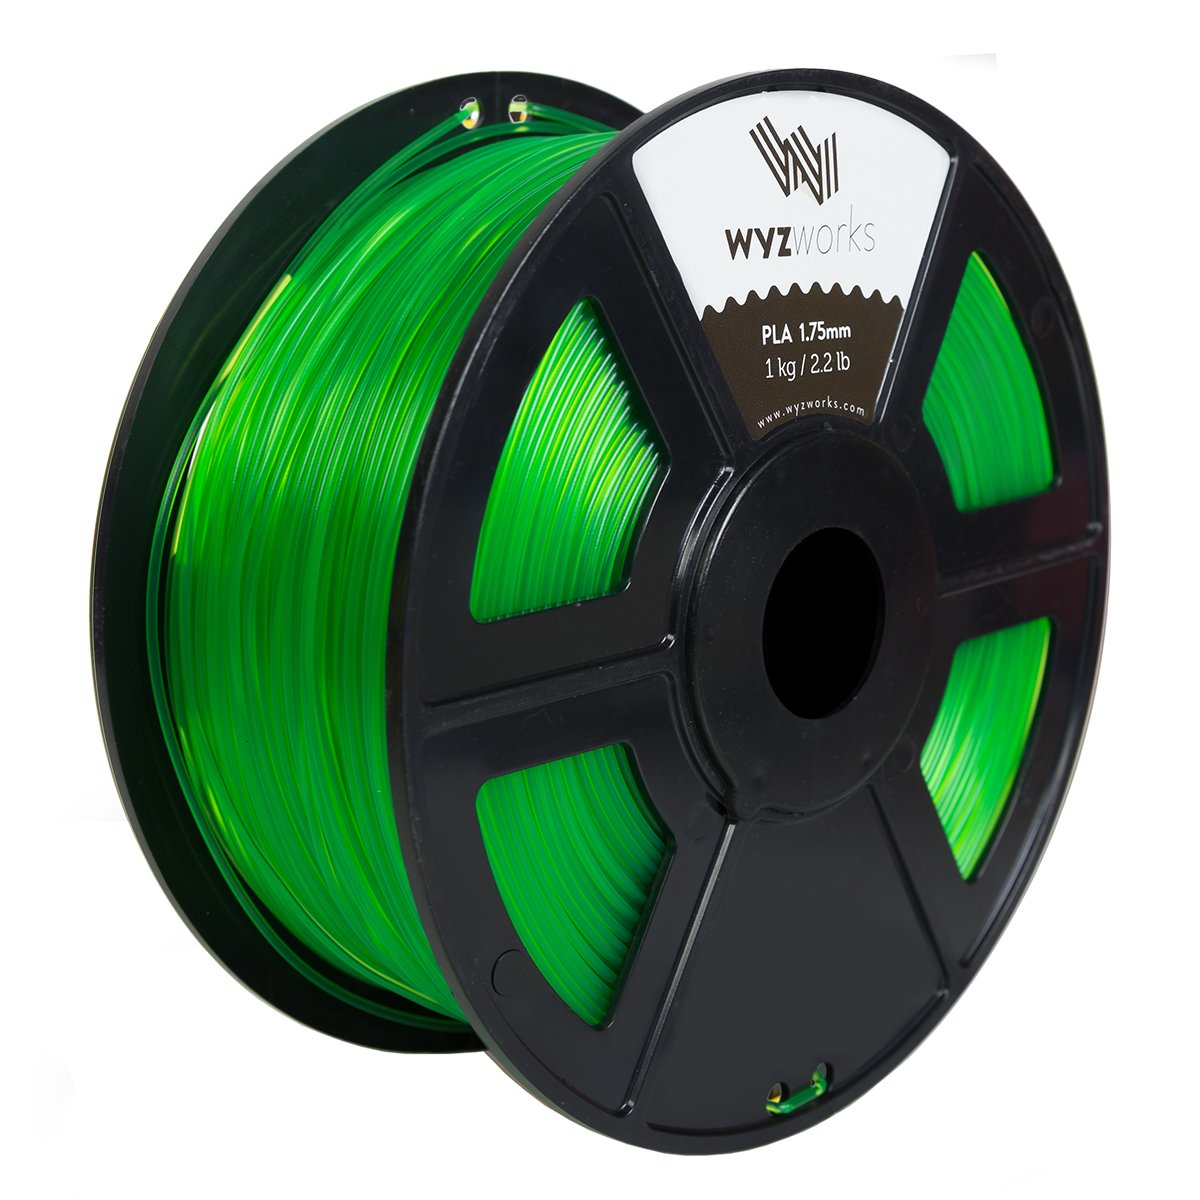 WYZworks PLA 1.75mm [ TRANSLUCENT GREEN ] Premium Thermoplastic Polylactic Acid 3D Printer Filament - Dimensional Accuracy +/- 0.05mm 1kg / 2.2lb + [ Multiple Color Options Available ]